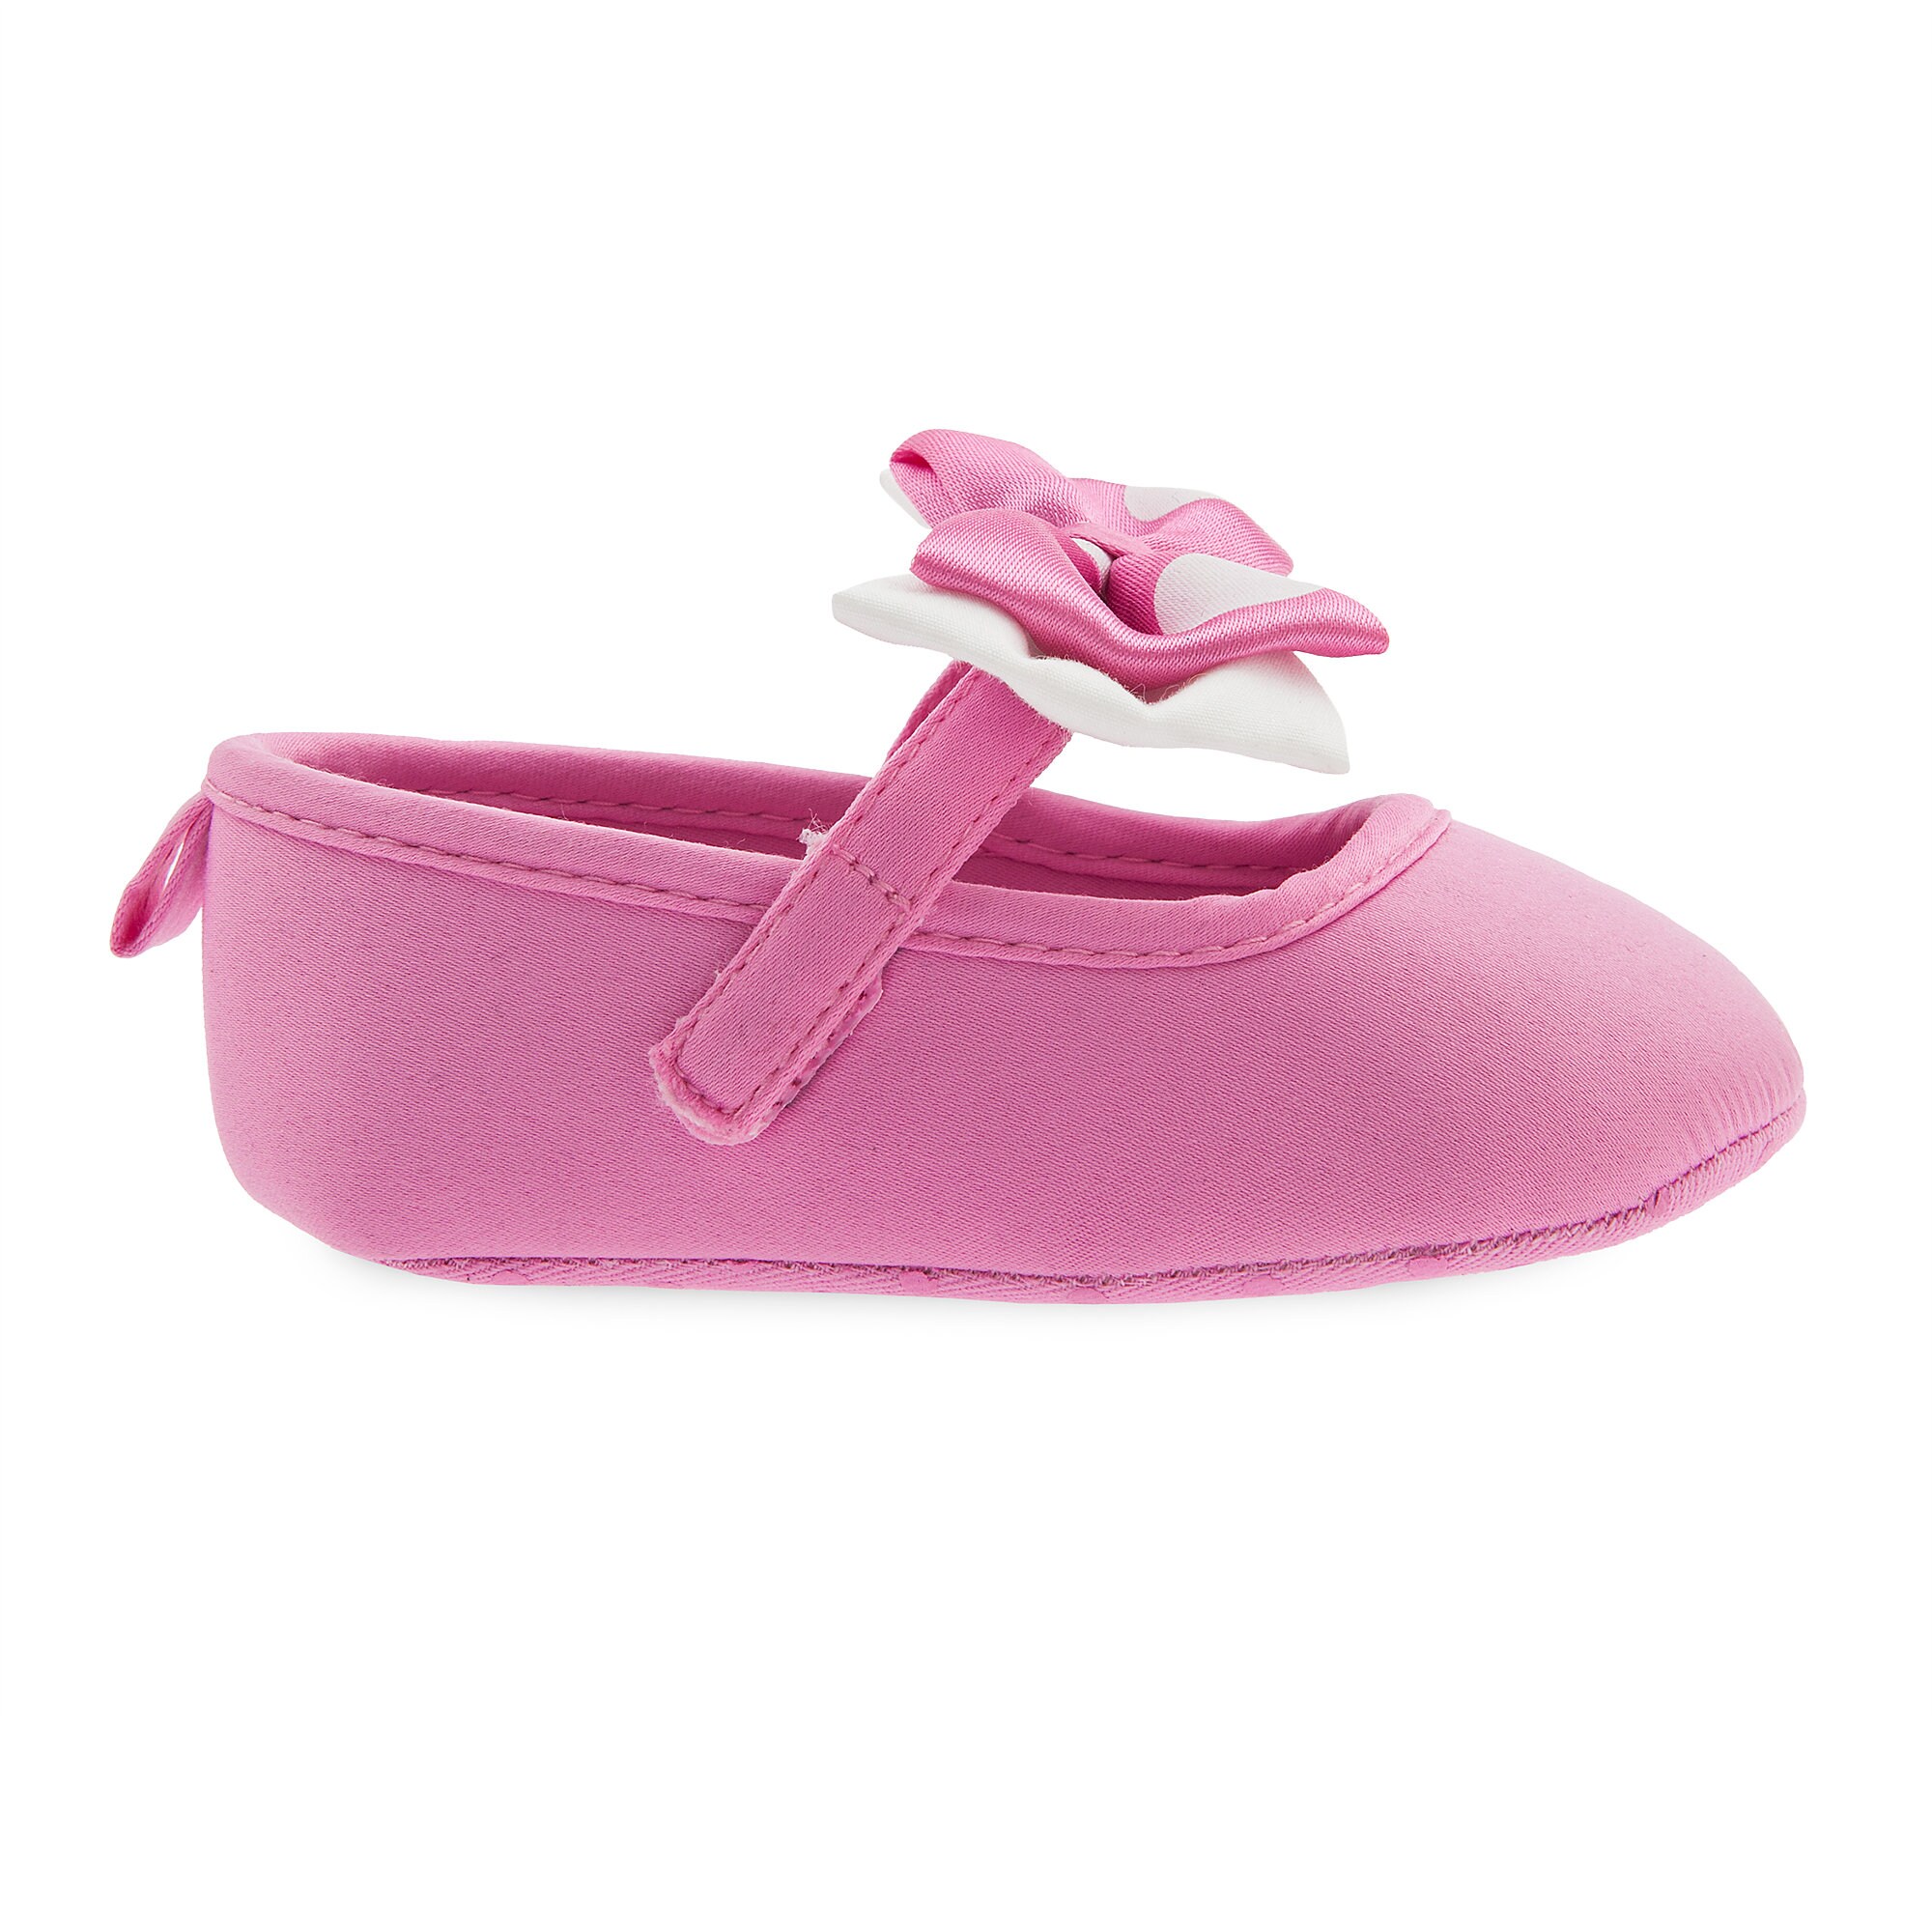 Minnie Mouse Costume Shoes for Baby - Pink